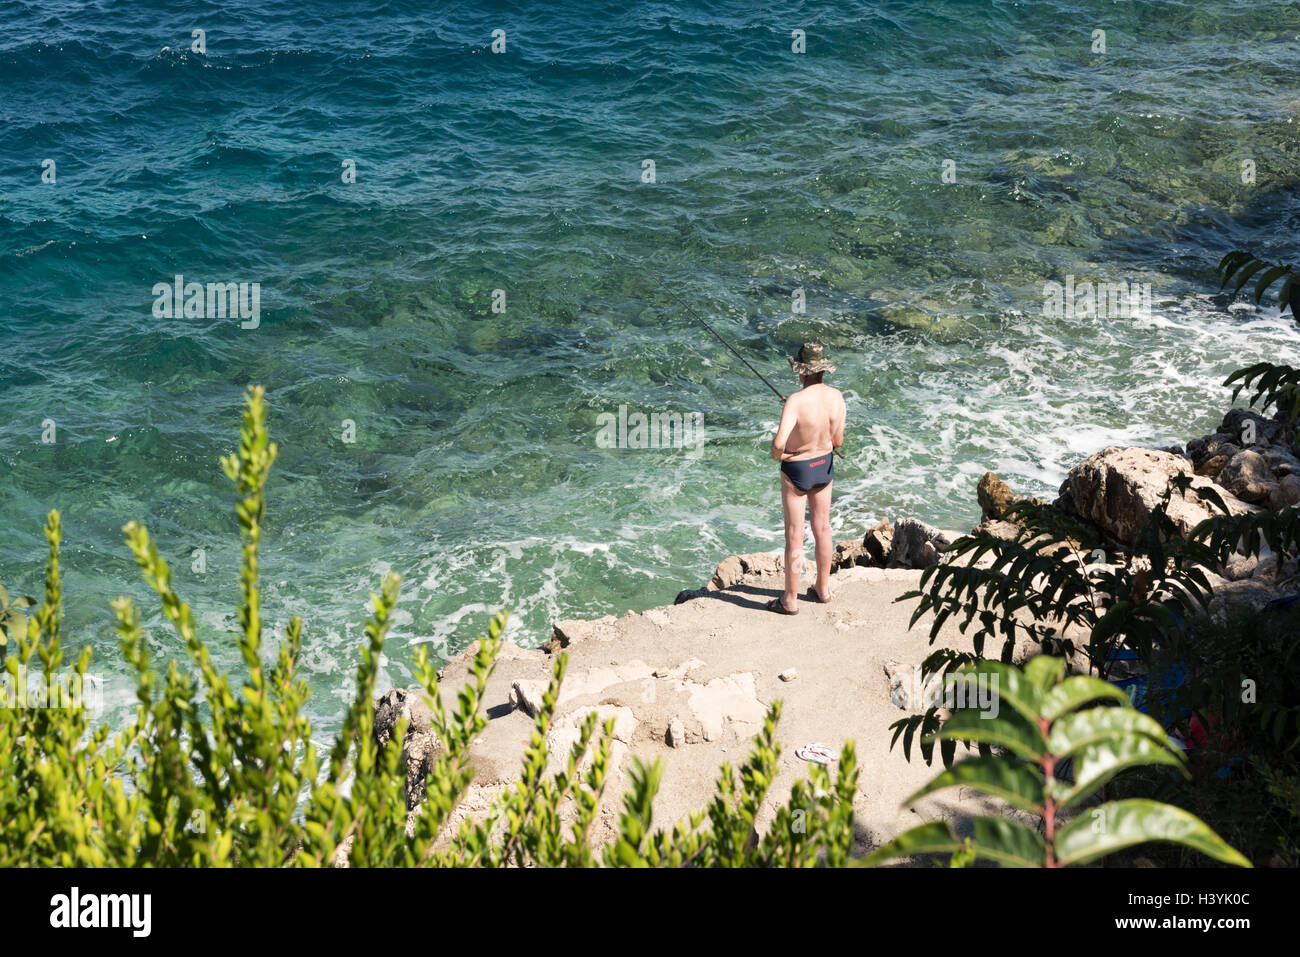 A man wearing swimming trunks fishing on a rocky seashore at Trpanj Croatia on a sunny summer day Stock Photo